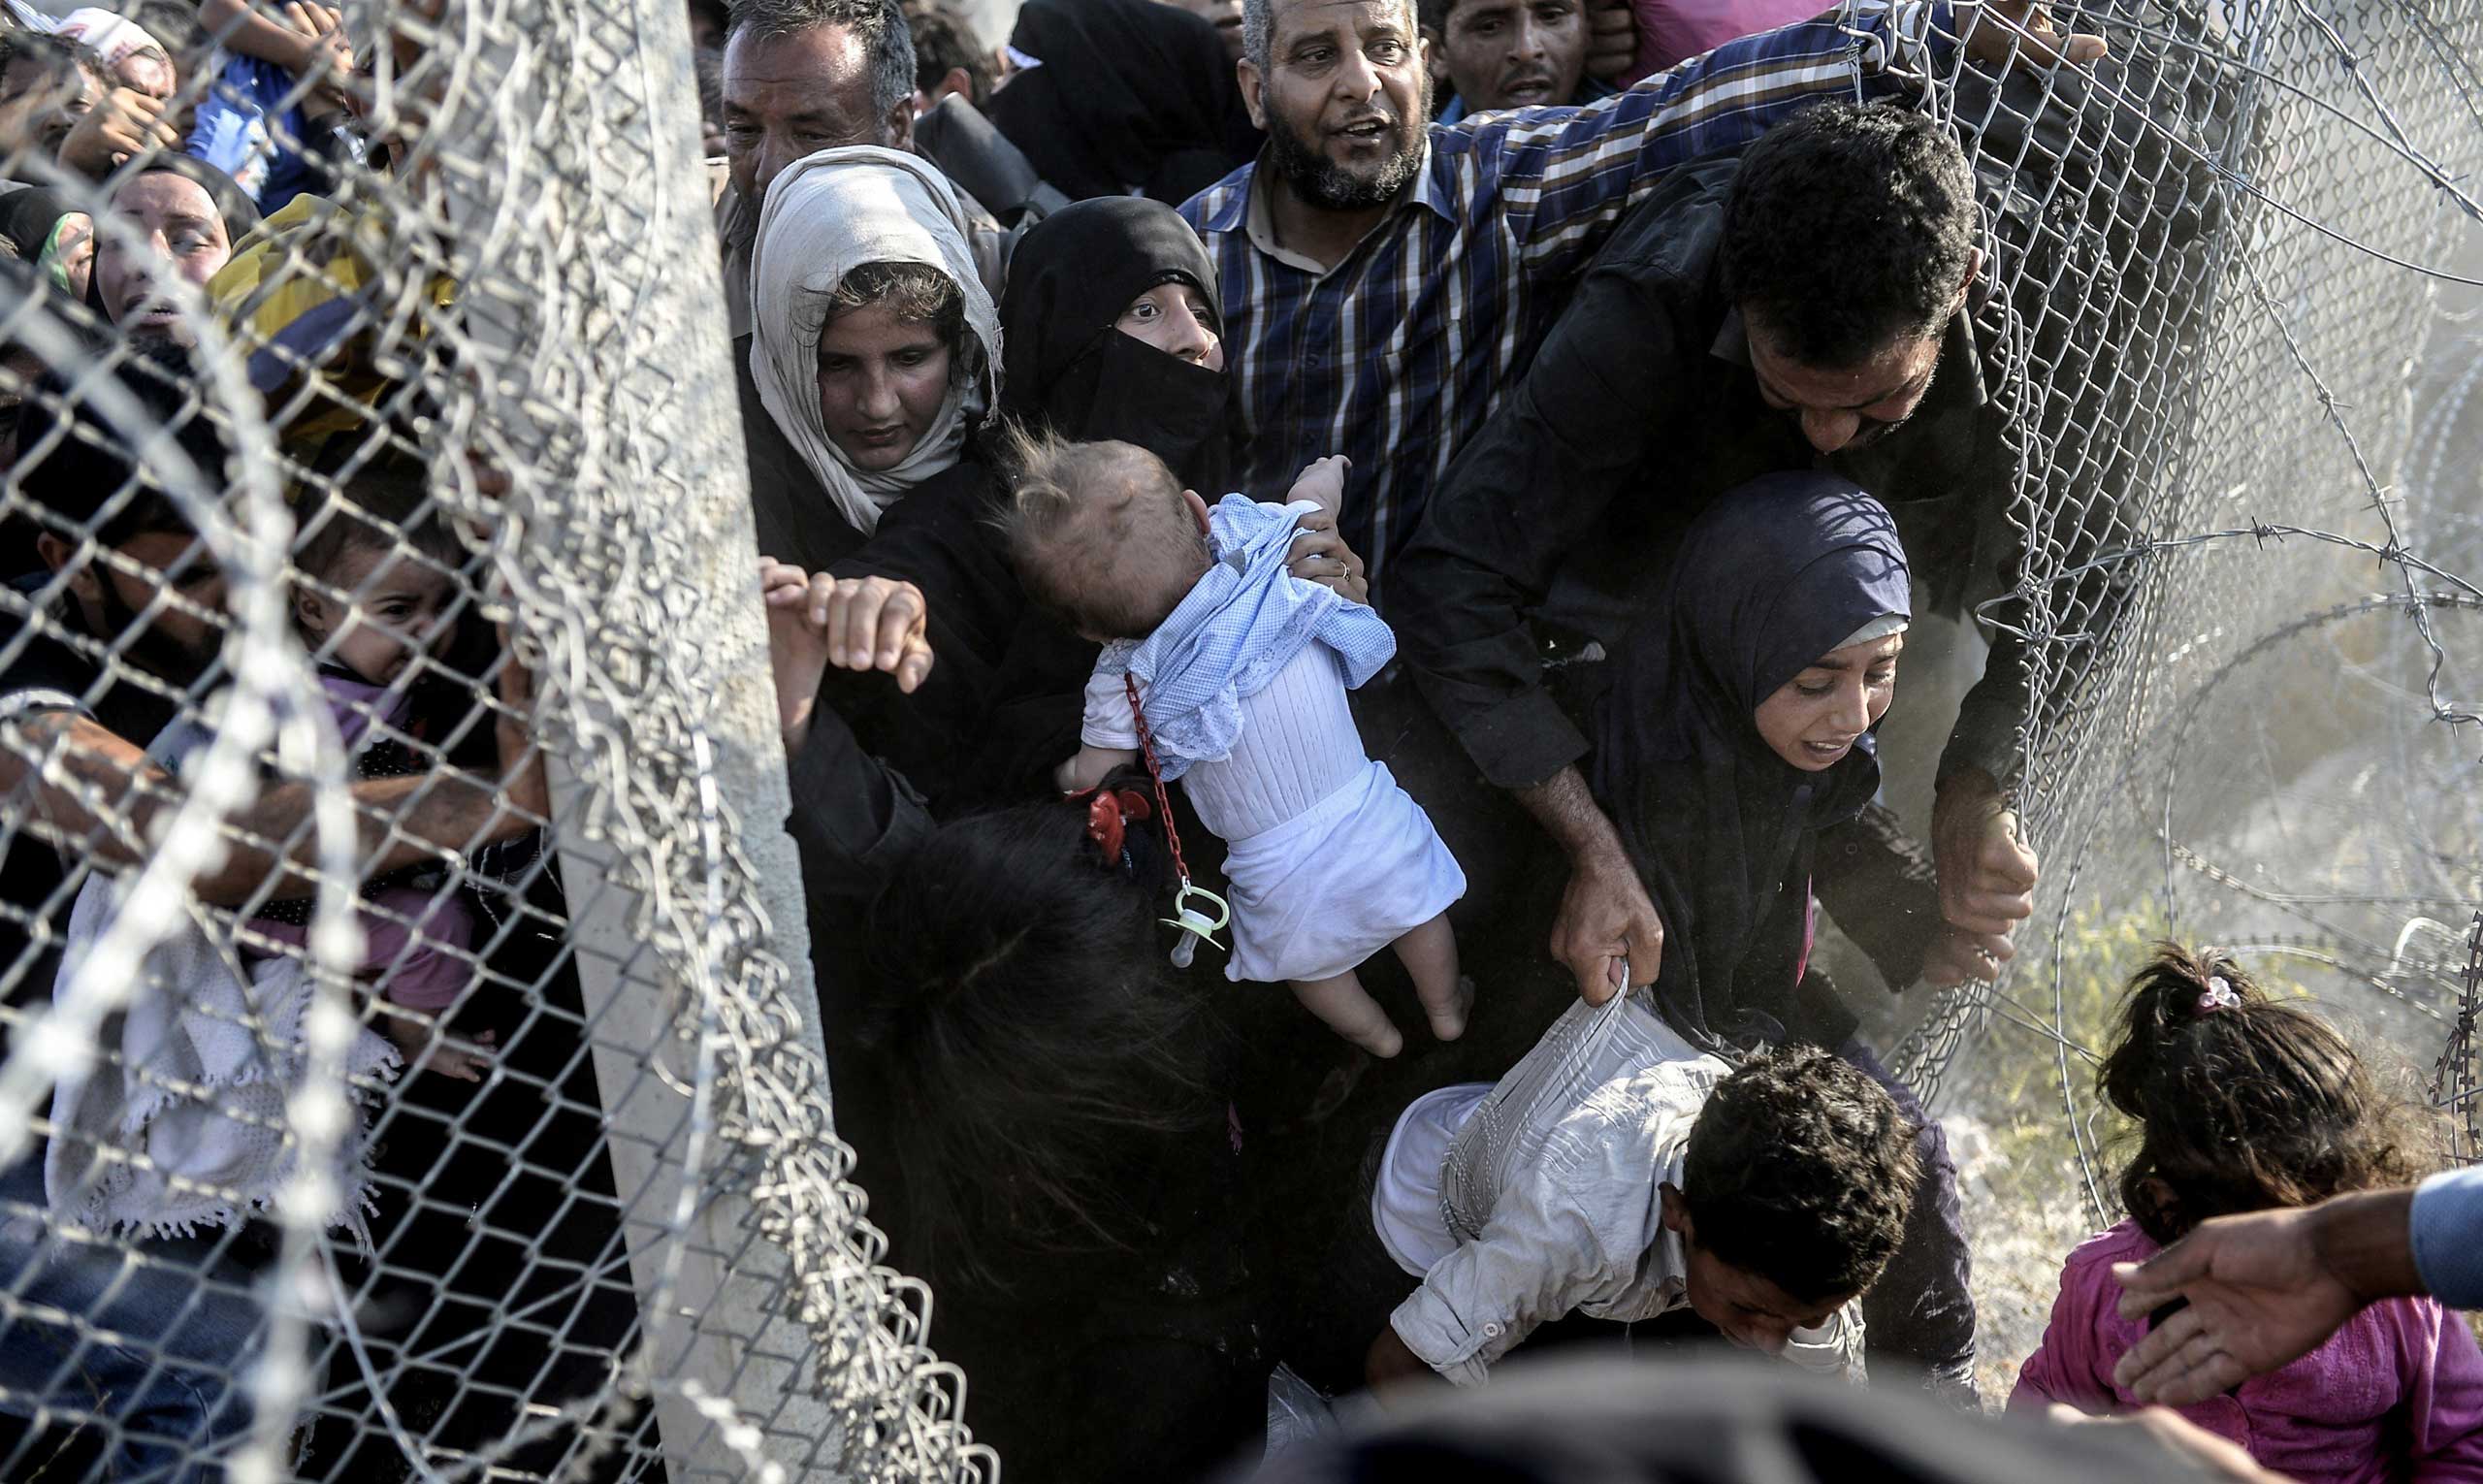 Syrians flee the war rush through broken down border fences to enter Turkish territory illegally, near the crossing at Akçakale in Sanliurfa province, on June 14, 2015.